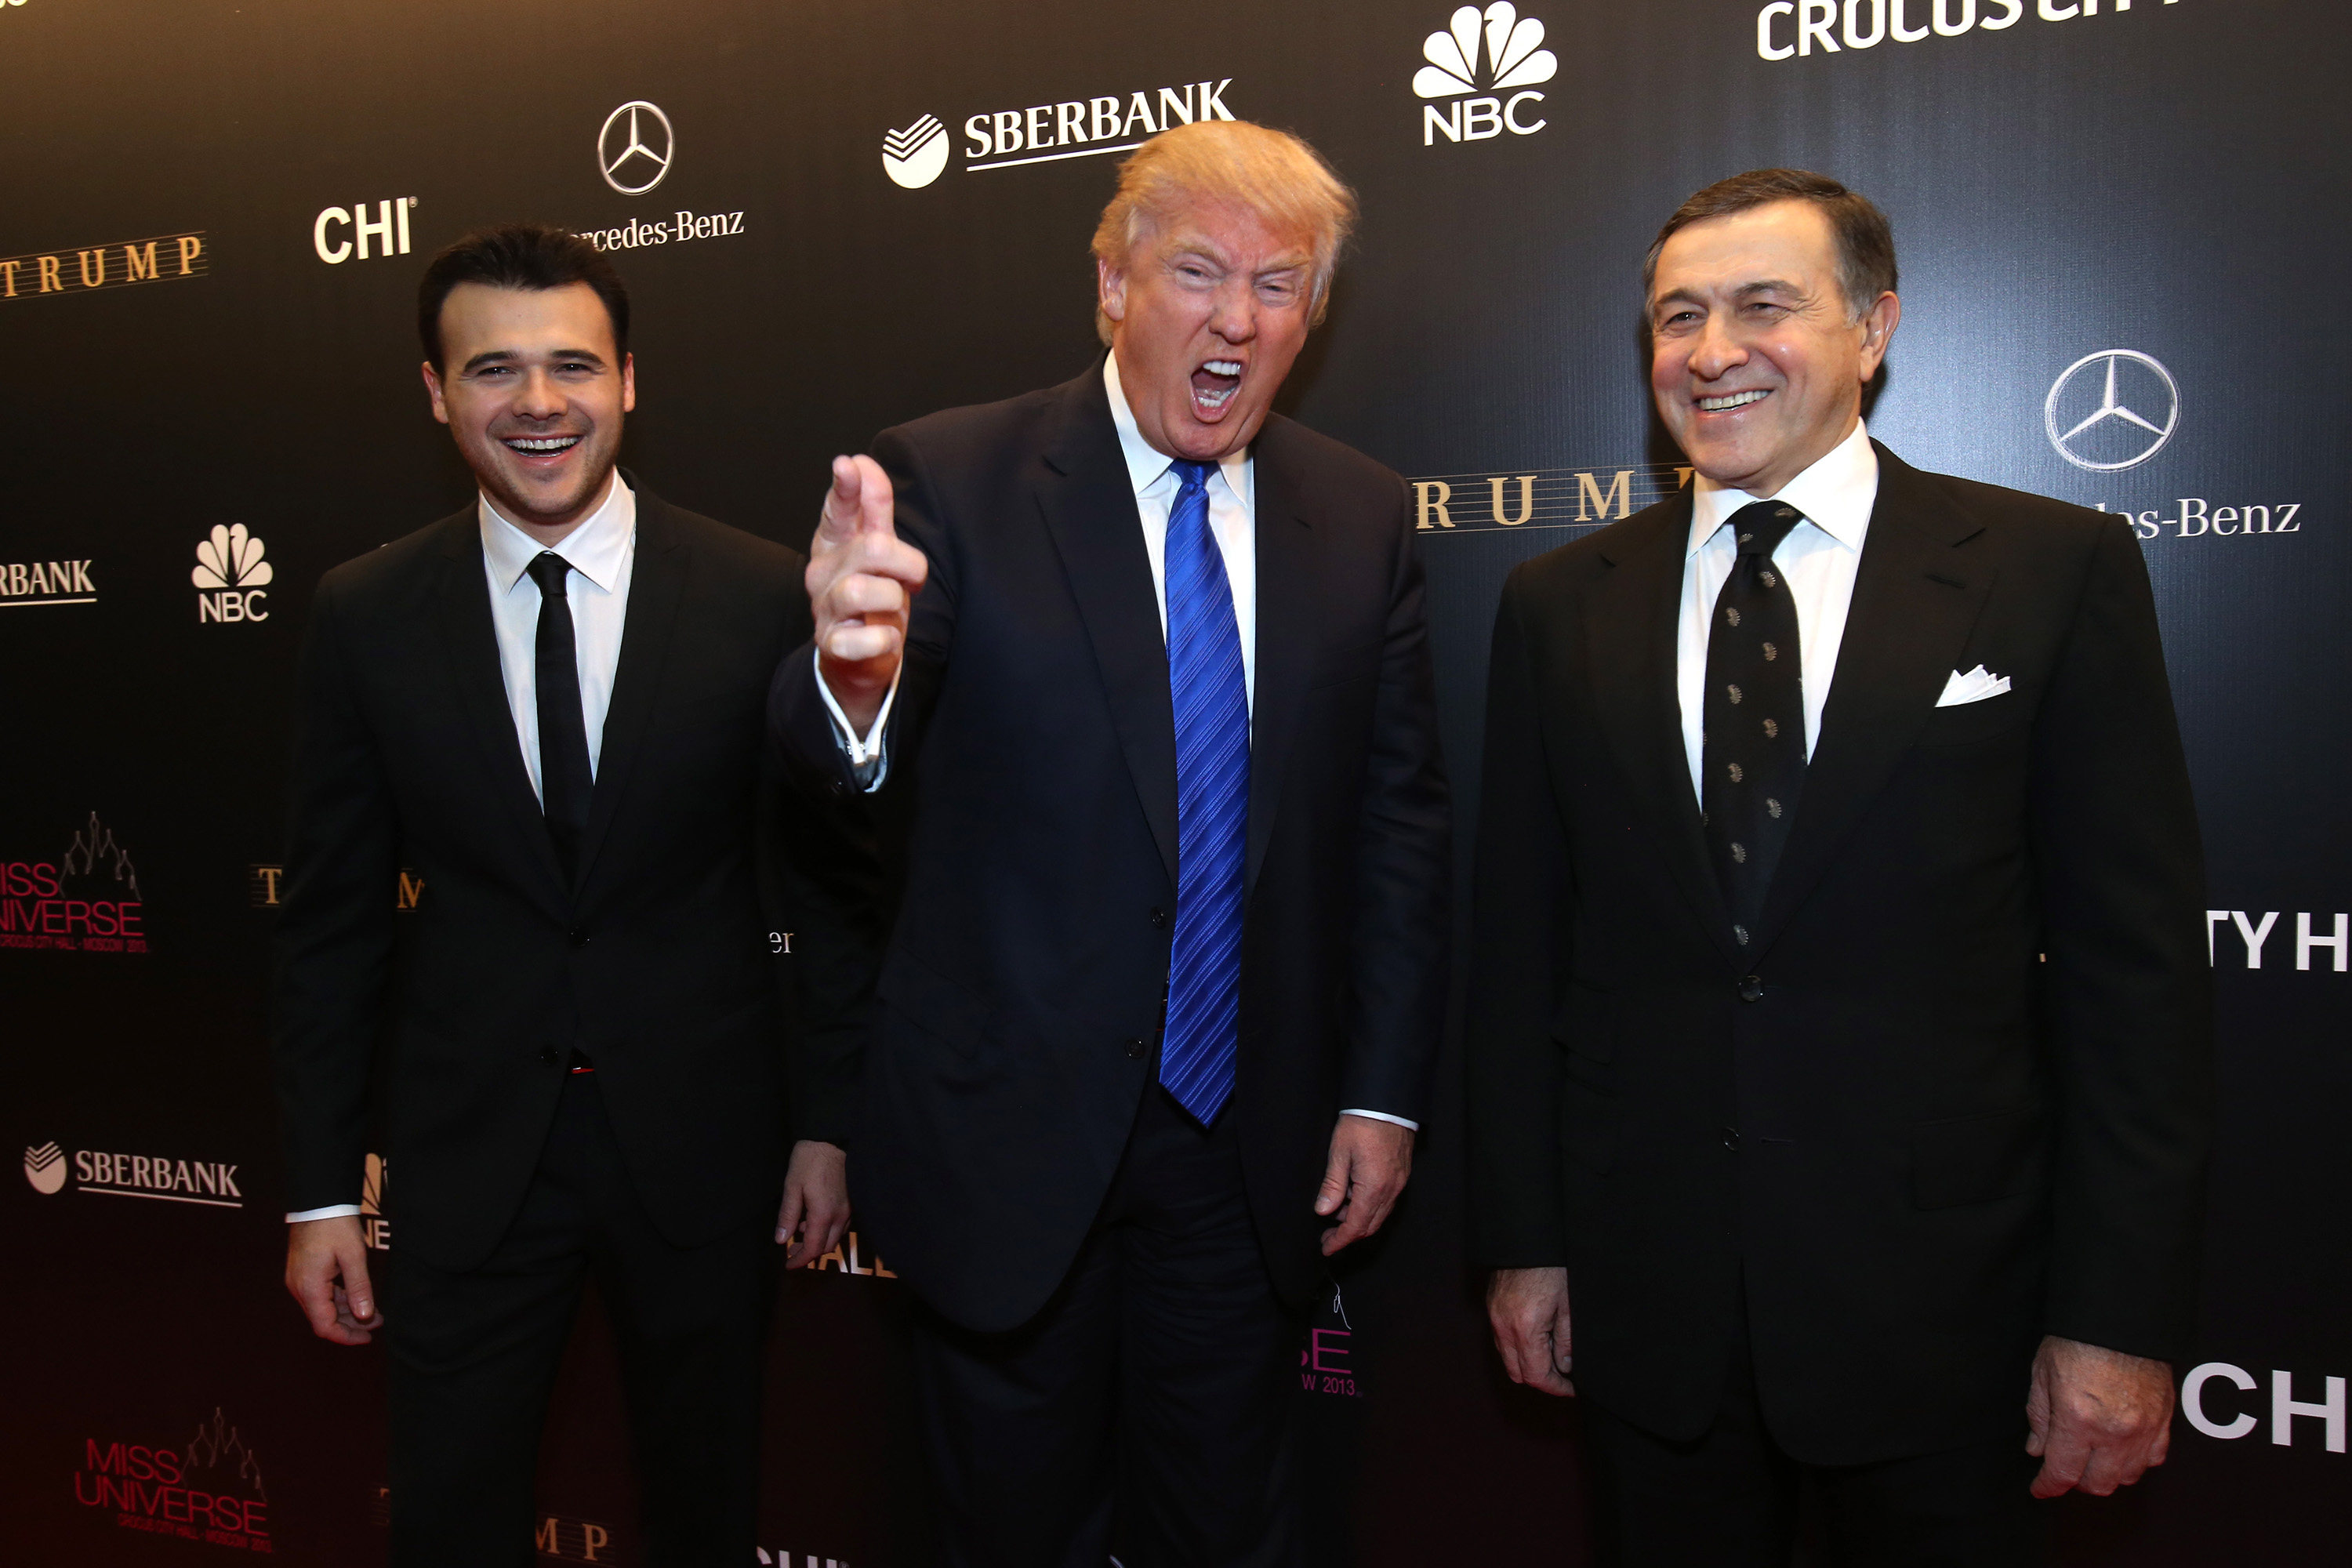 From left, Crocus Group vice-president Emin Agalarov, Donald Trump and Crocus Group president Aras Agalarov at the Miss Universe 2013 Pageant finale at Crocus Town Hall in Moscow on November 9, 2013. Photo: TASS / Zuma Press / TNS